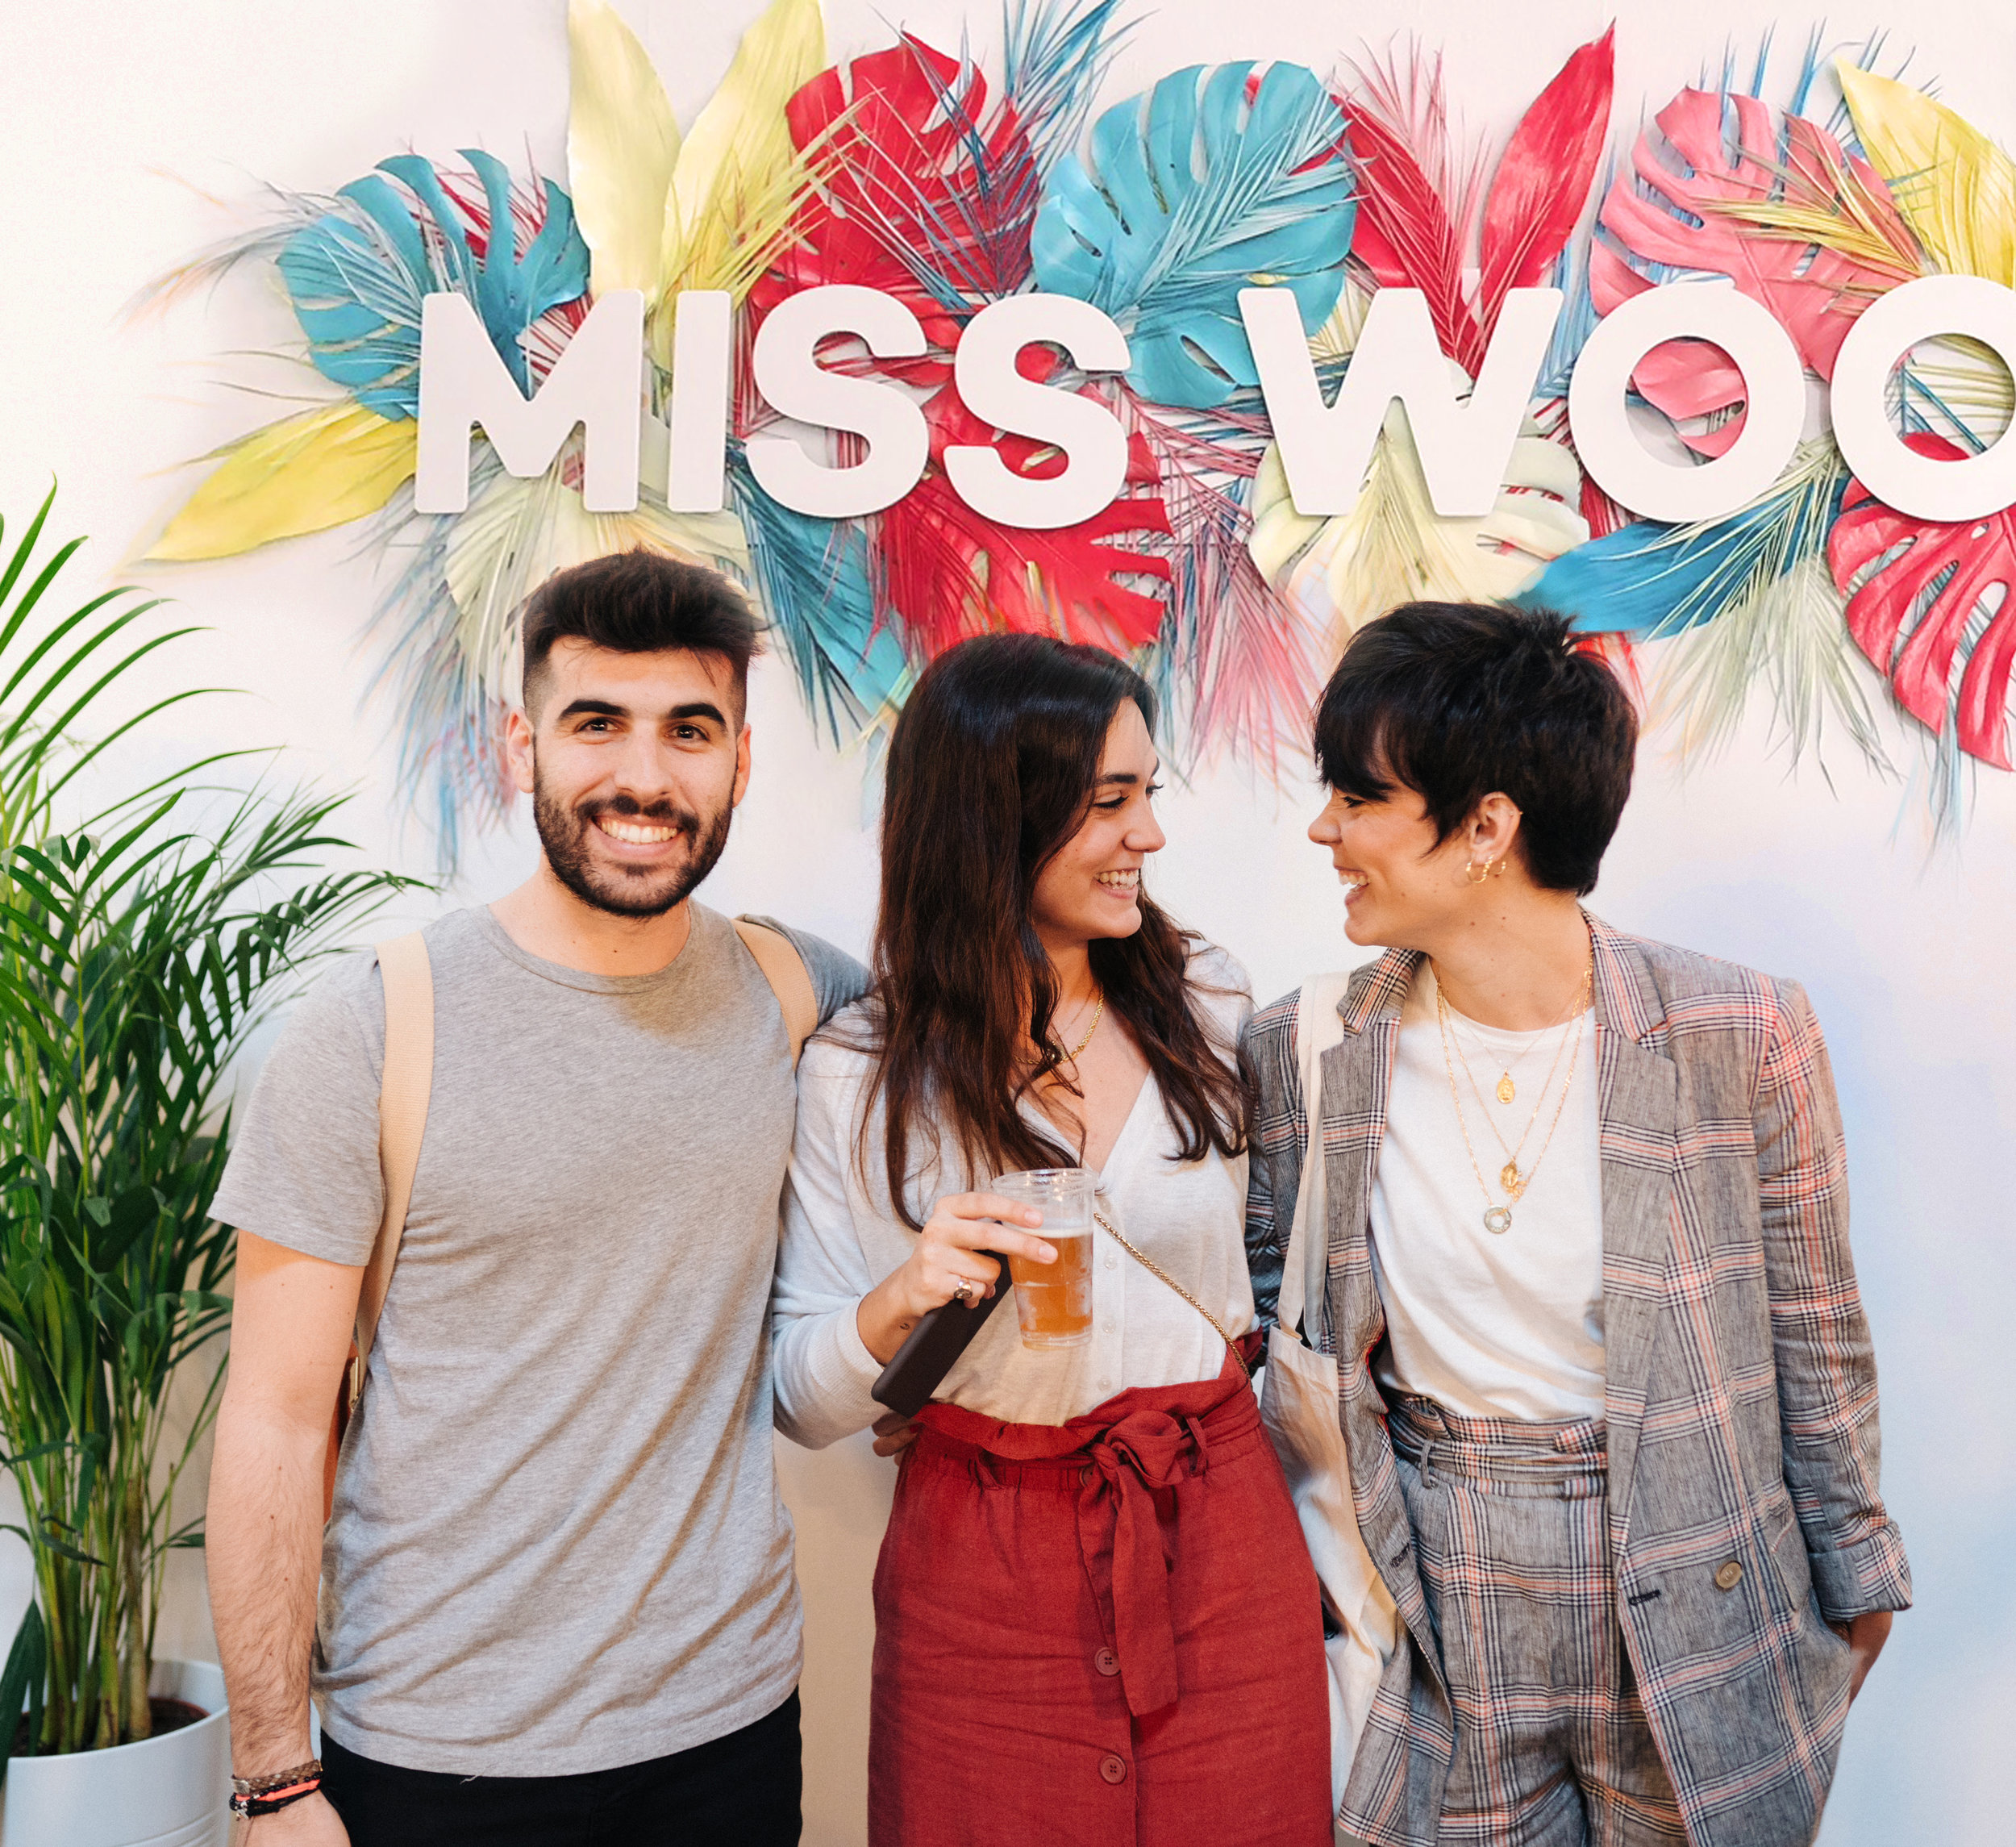 Evento-MissWood-27lletres.jpg